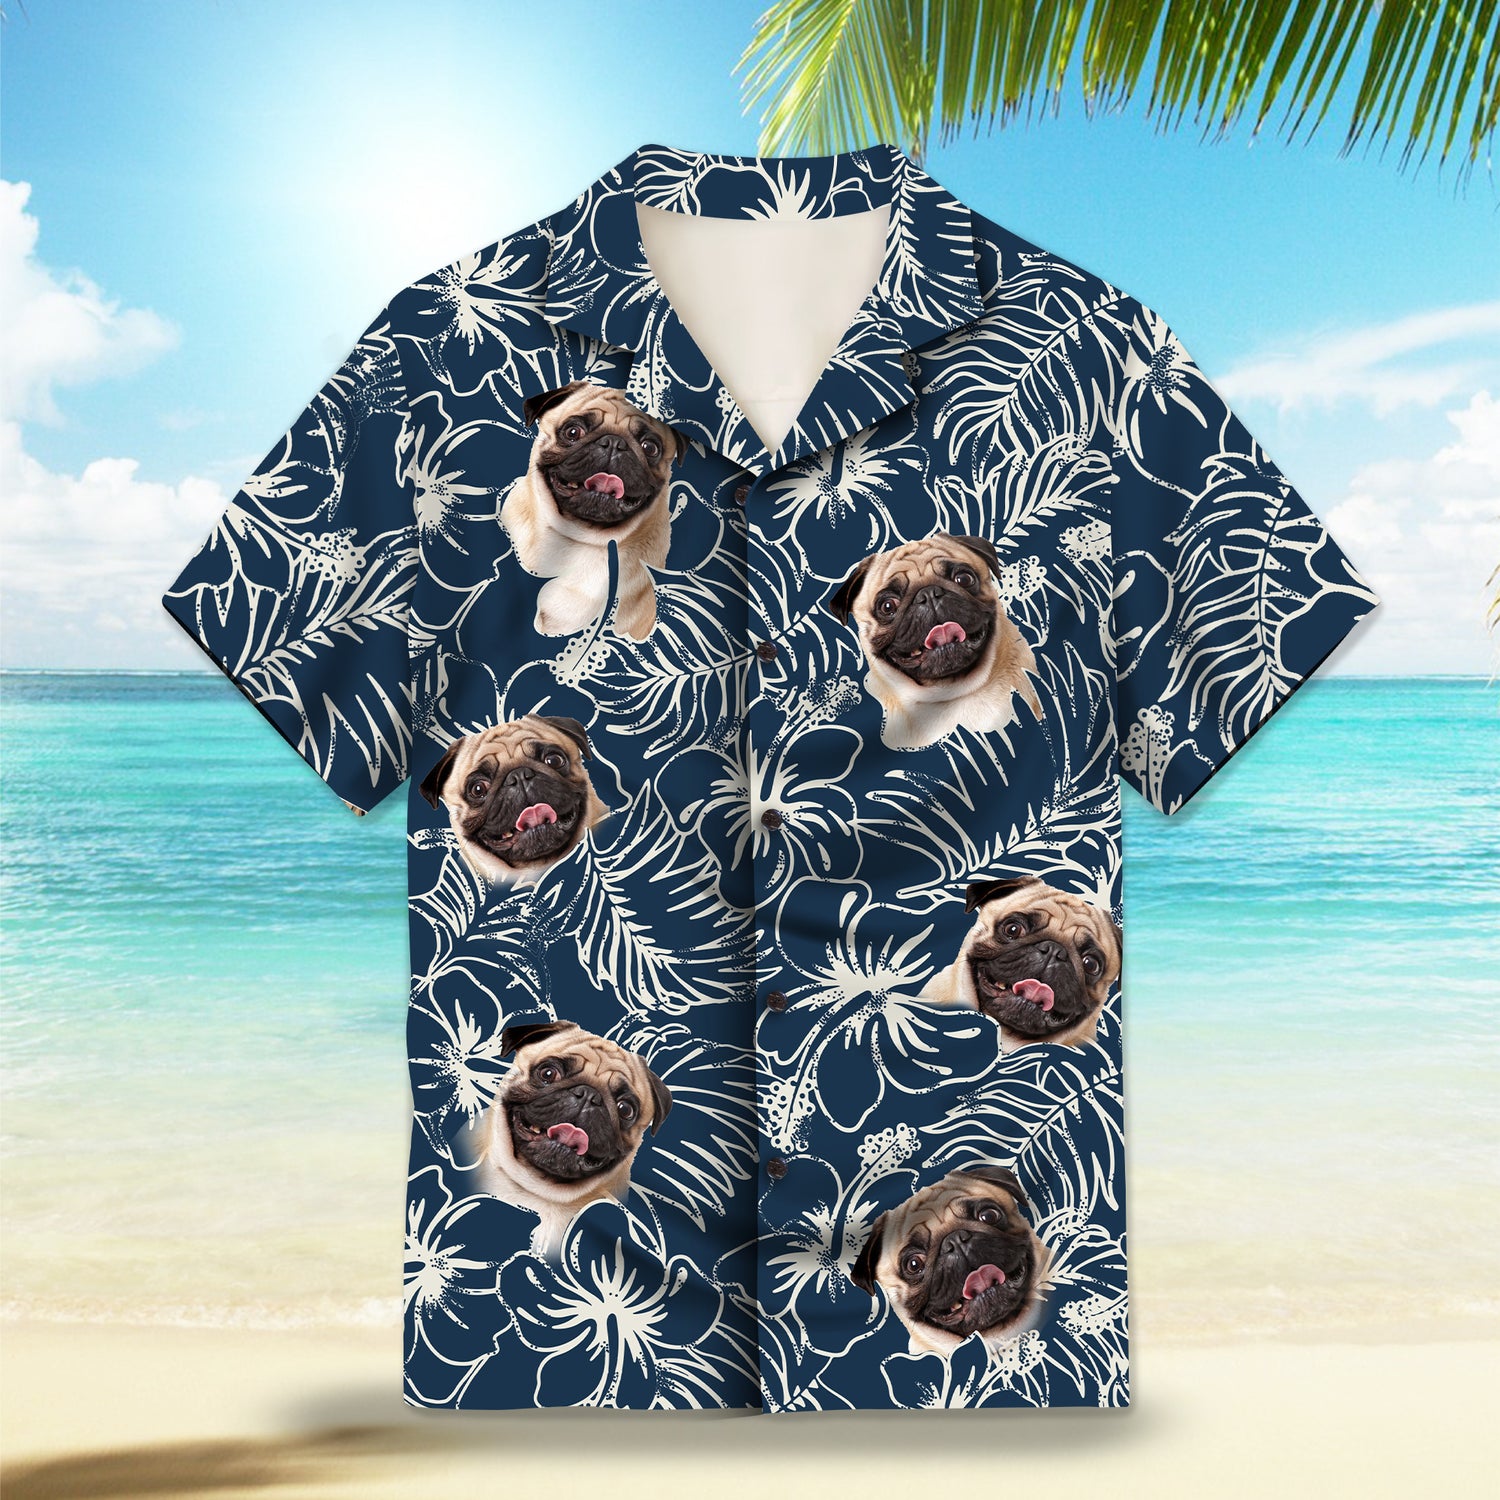 Image: Hibiscus Flower and Tropical Plant in Navy Blue Custom Hawaiian Shirt. Featuring intricate hibiscus flower and tropical plant designs in a deep navy blue color, perfect for a tropical island getaway. Alt text for accessibility.